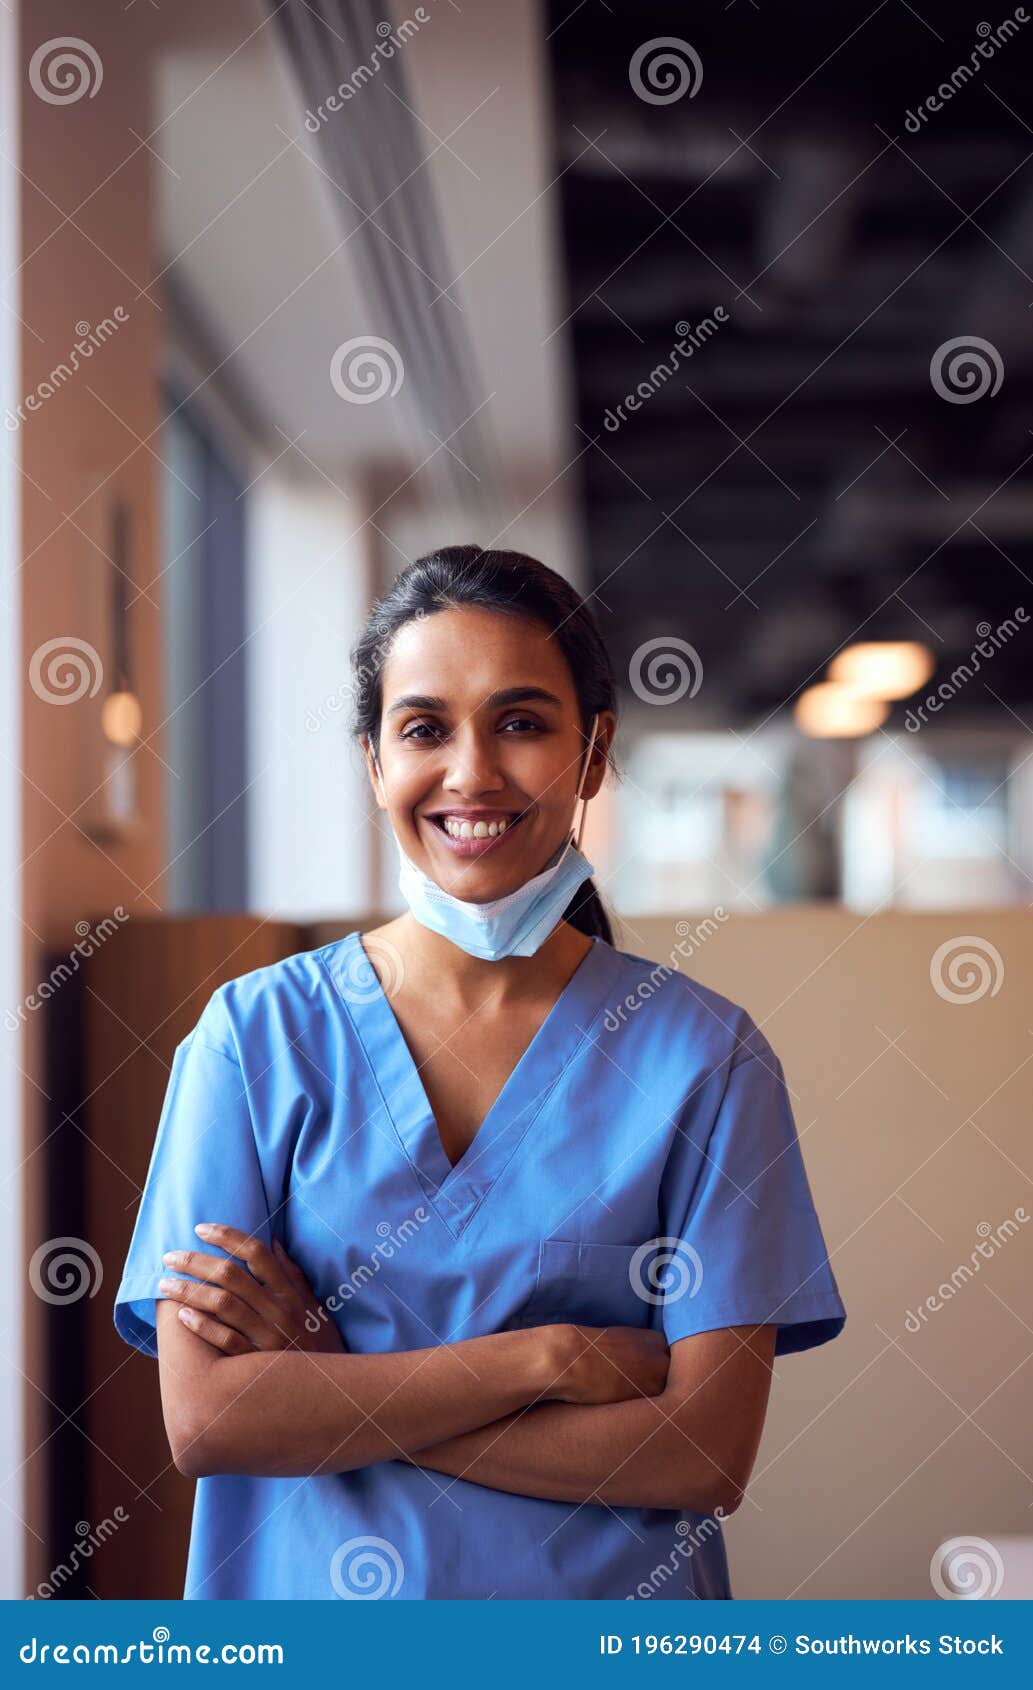 smiling female doctor with face mask wearing scrubs in busy hospital during health pandemic